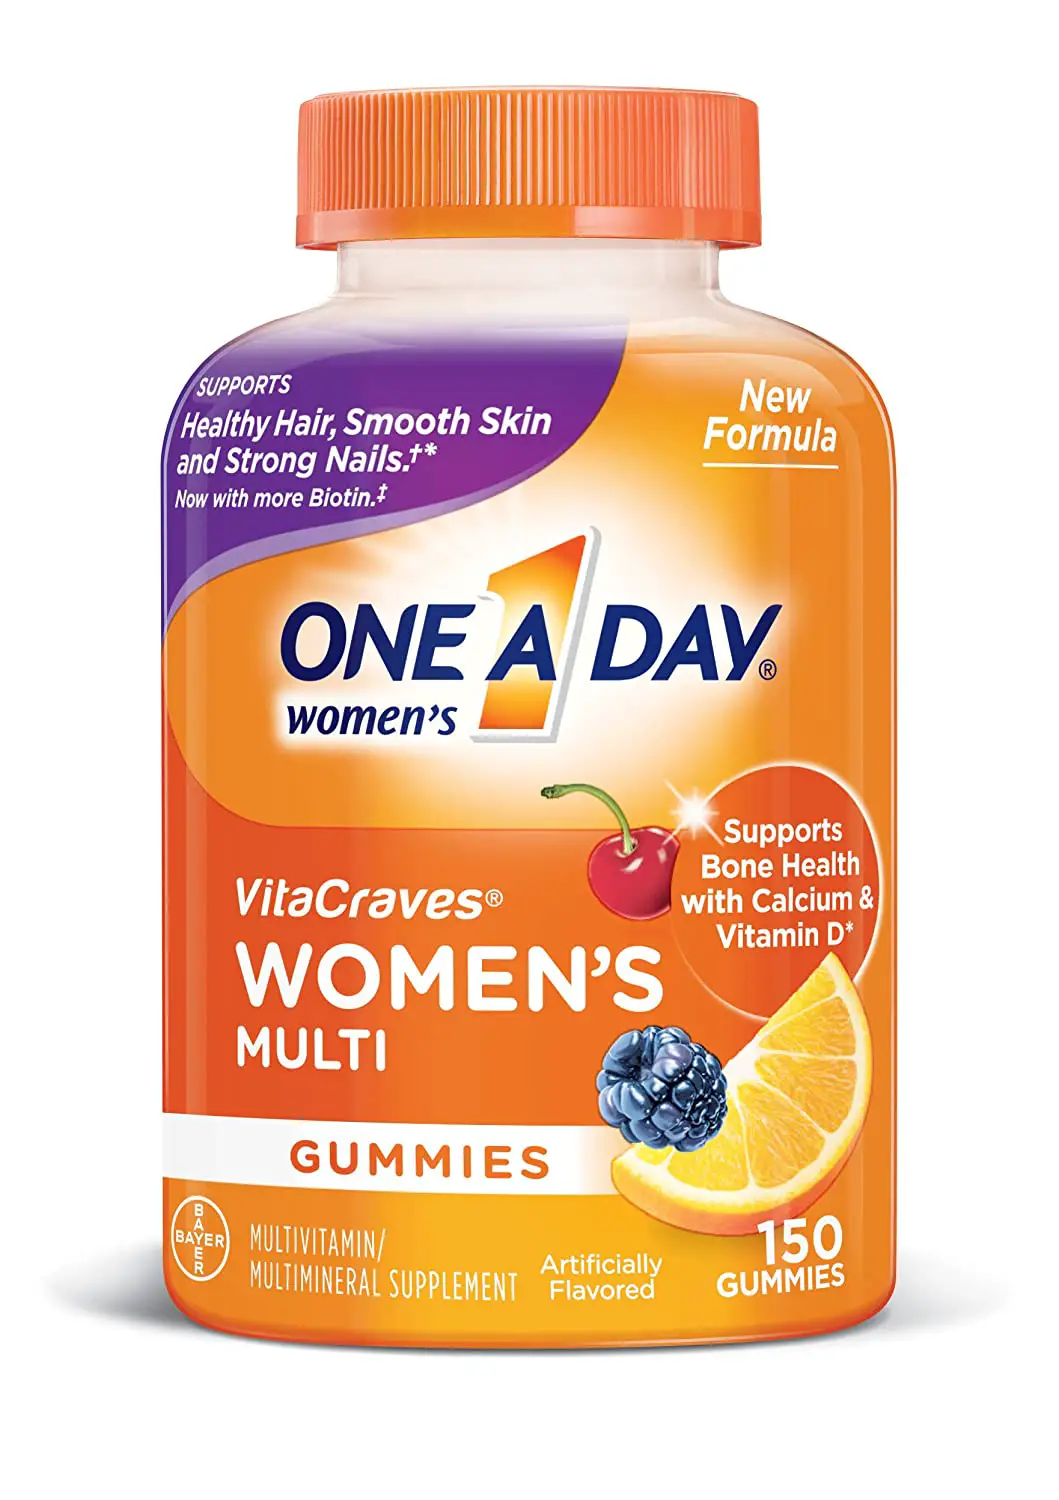 One a day vitamins review MISHKANET.COM